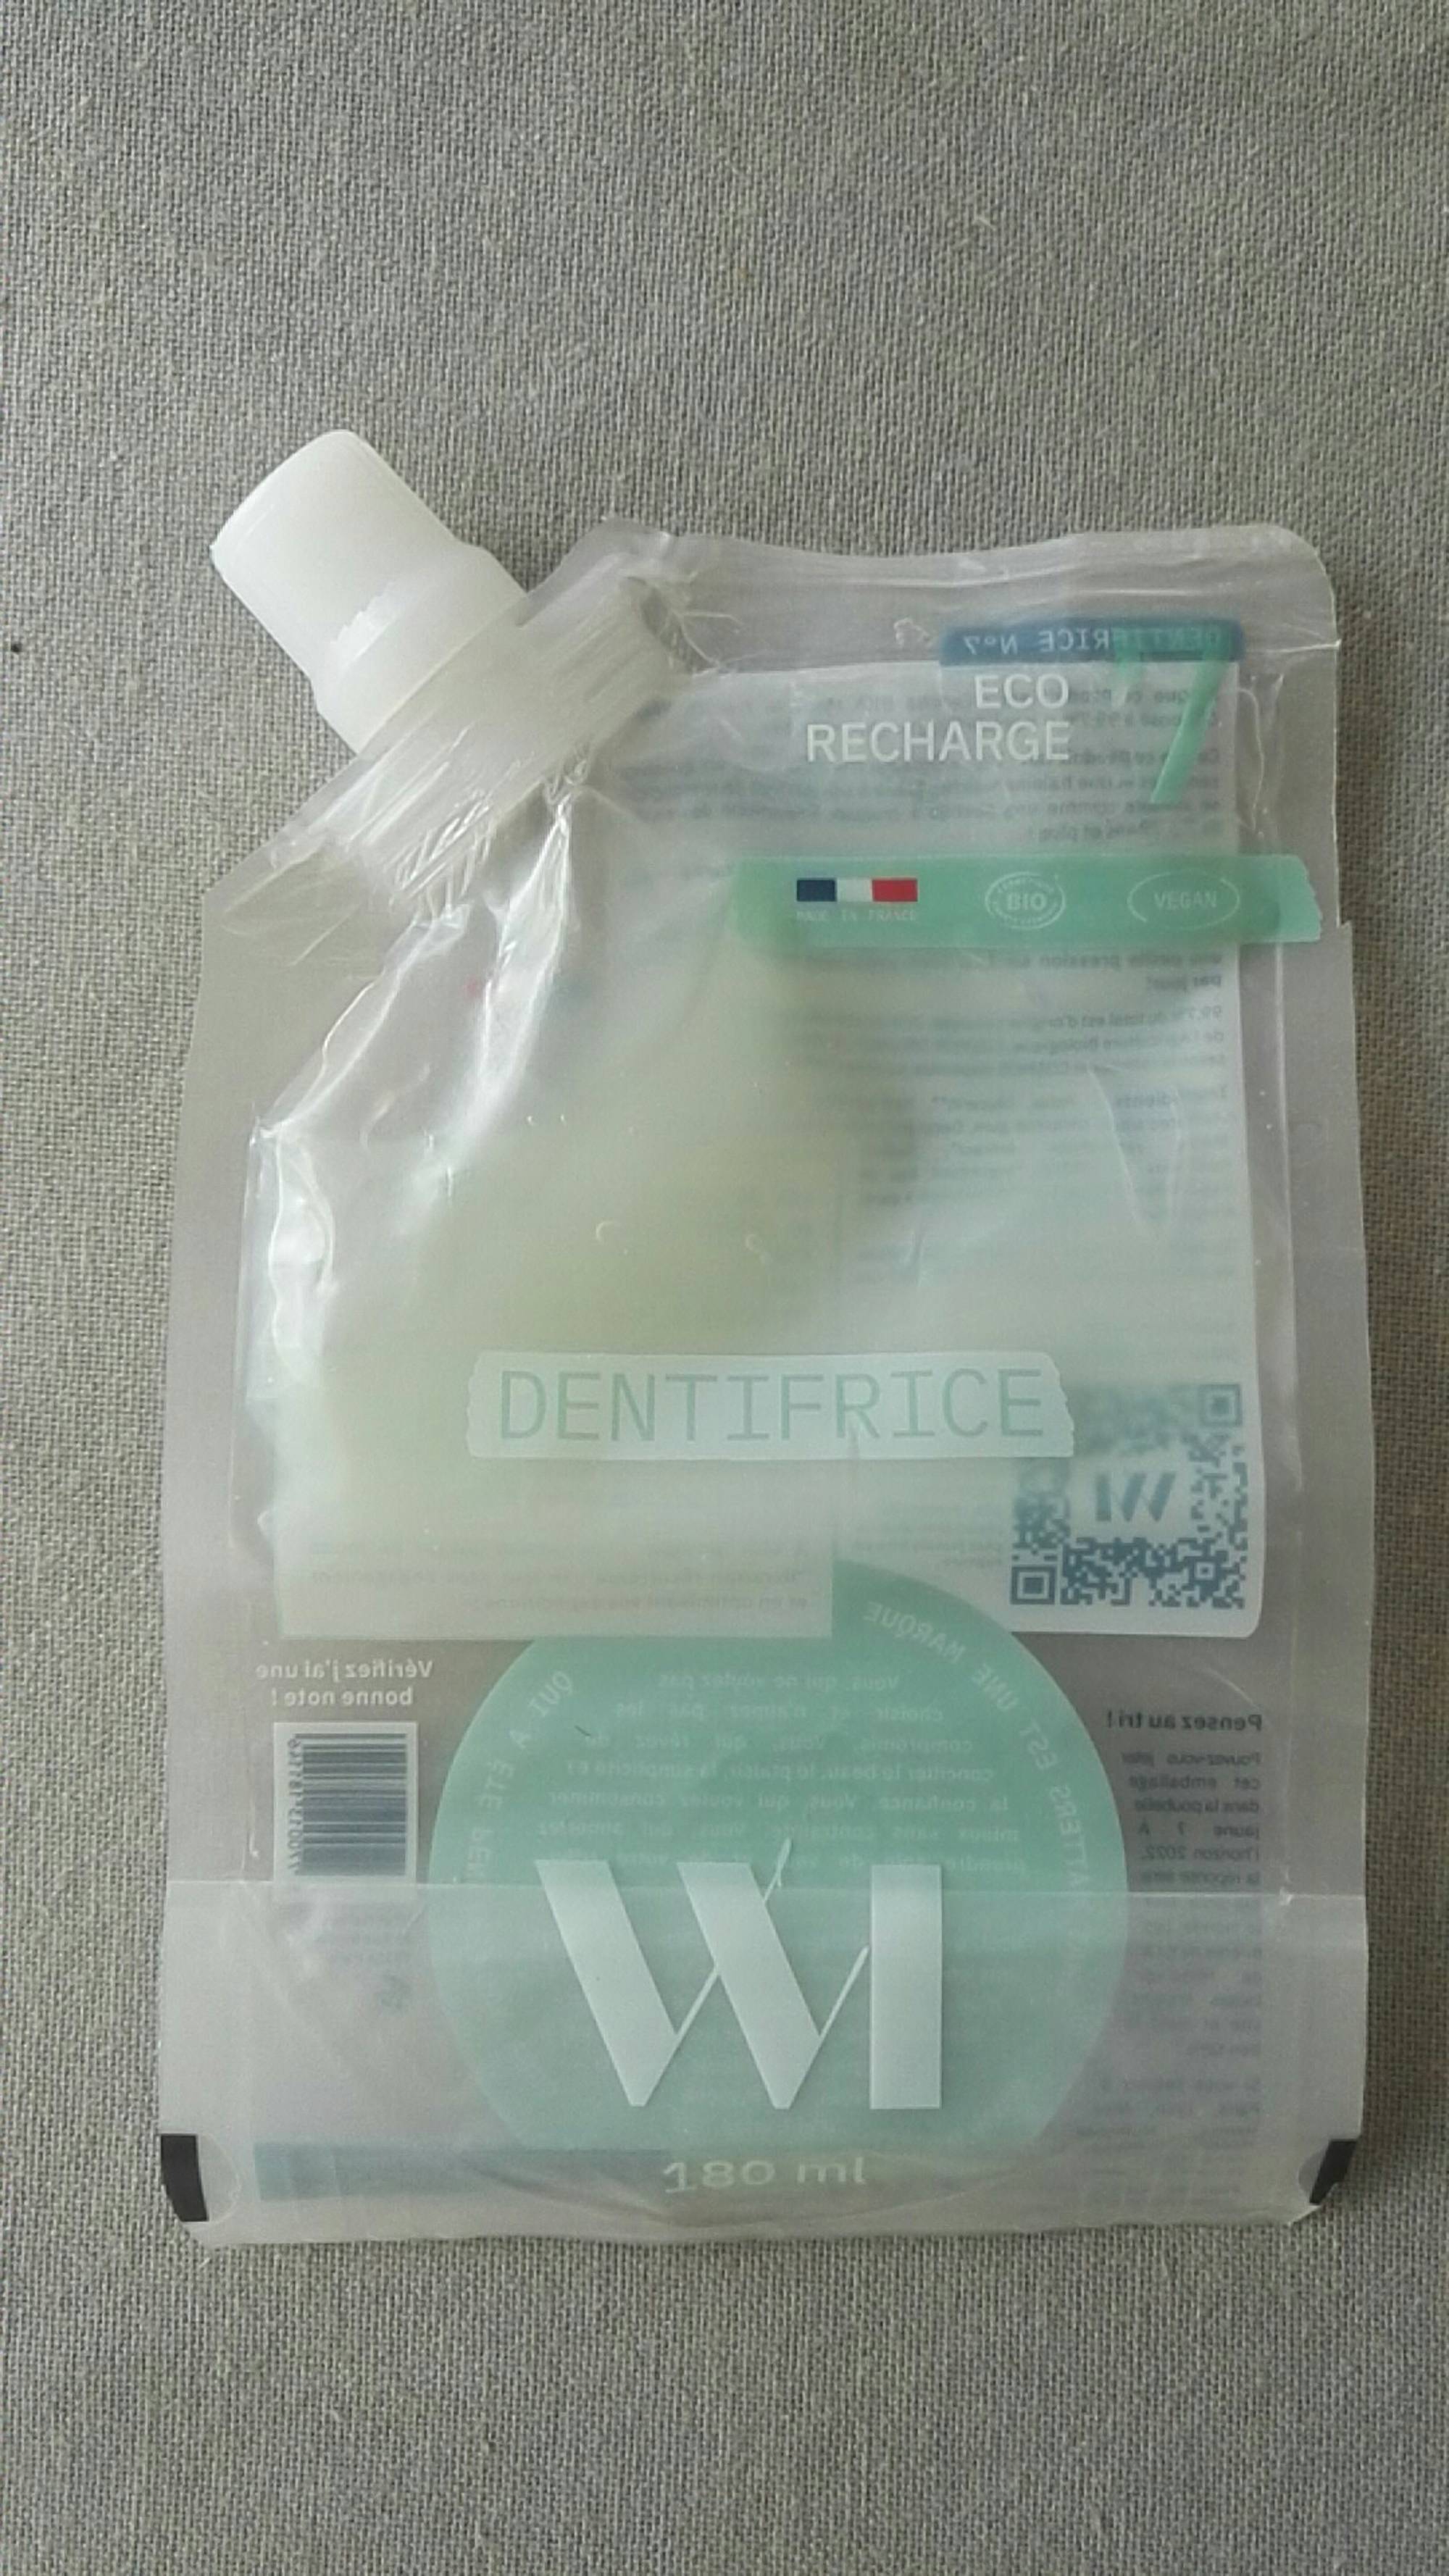 WHAT MATTERS - Dentifrice n° 7